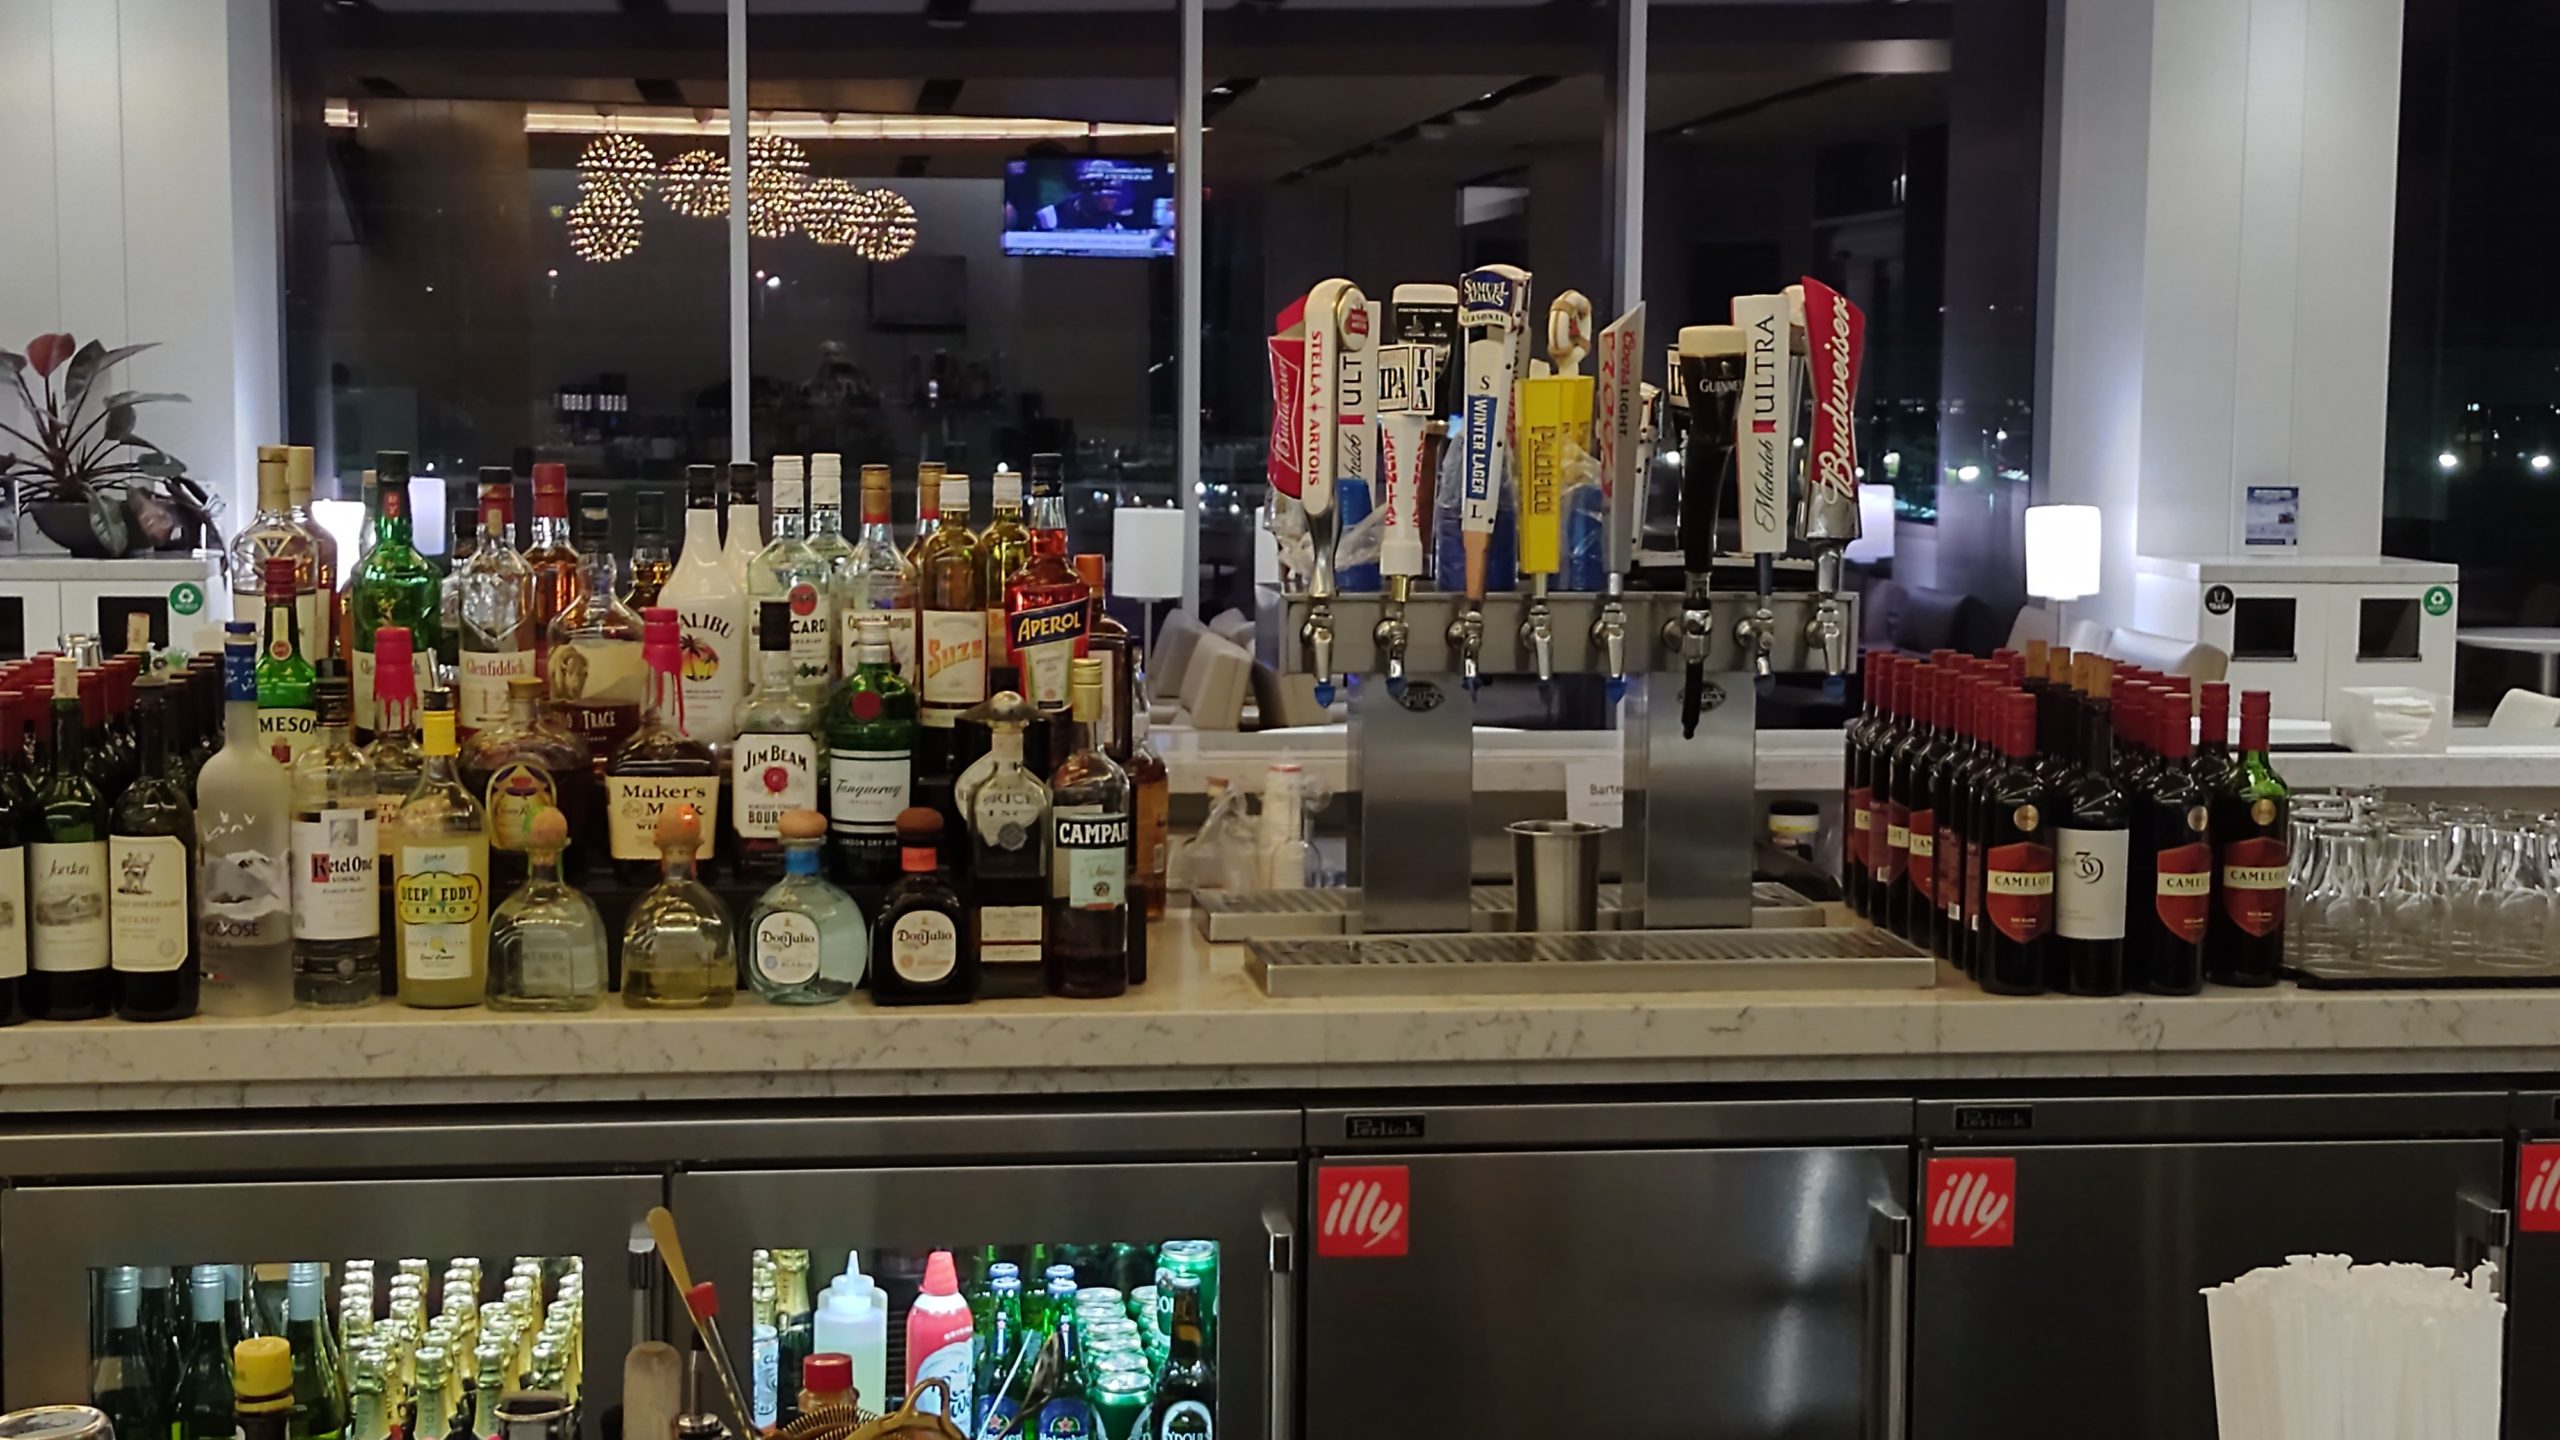 PICTURE OF THE BAR.